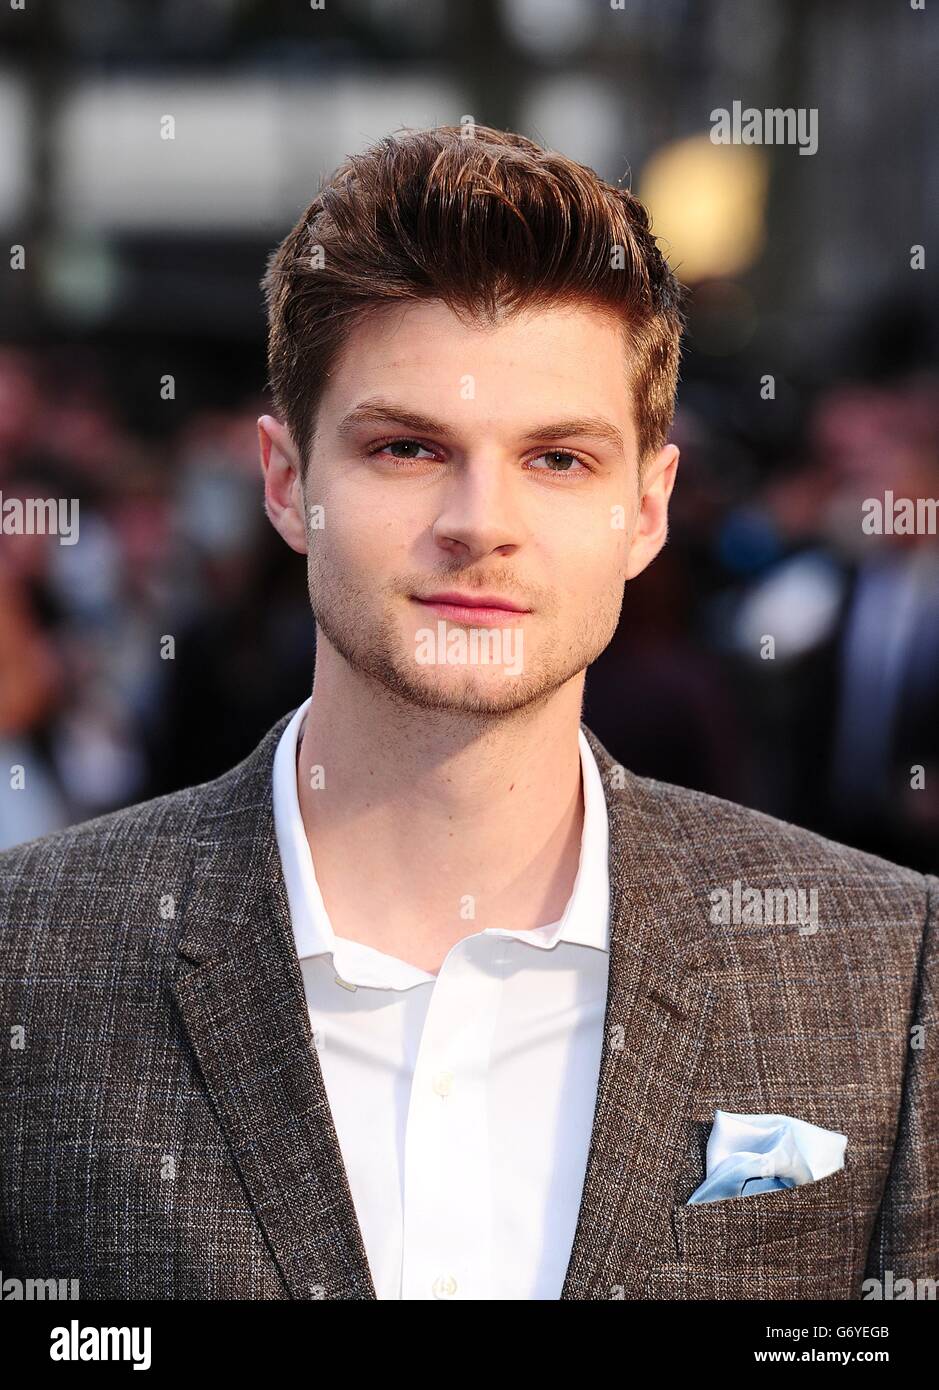 Noah Premiere - London. Jim Chapman arriving for the premiere of the film Noah held at the Odeon Leicester Square, central London. Stock Photo